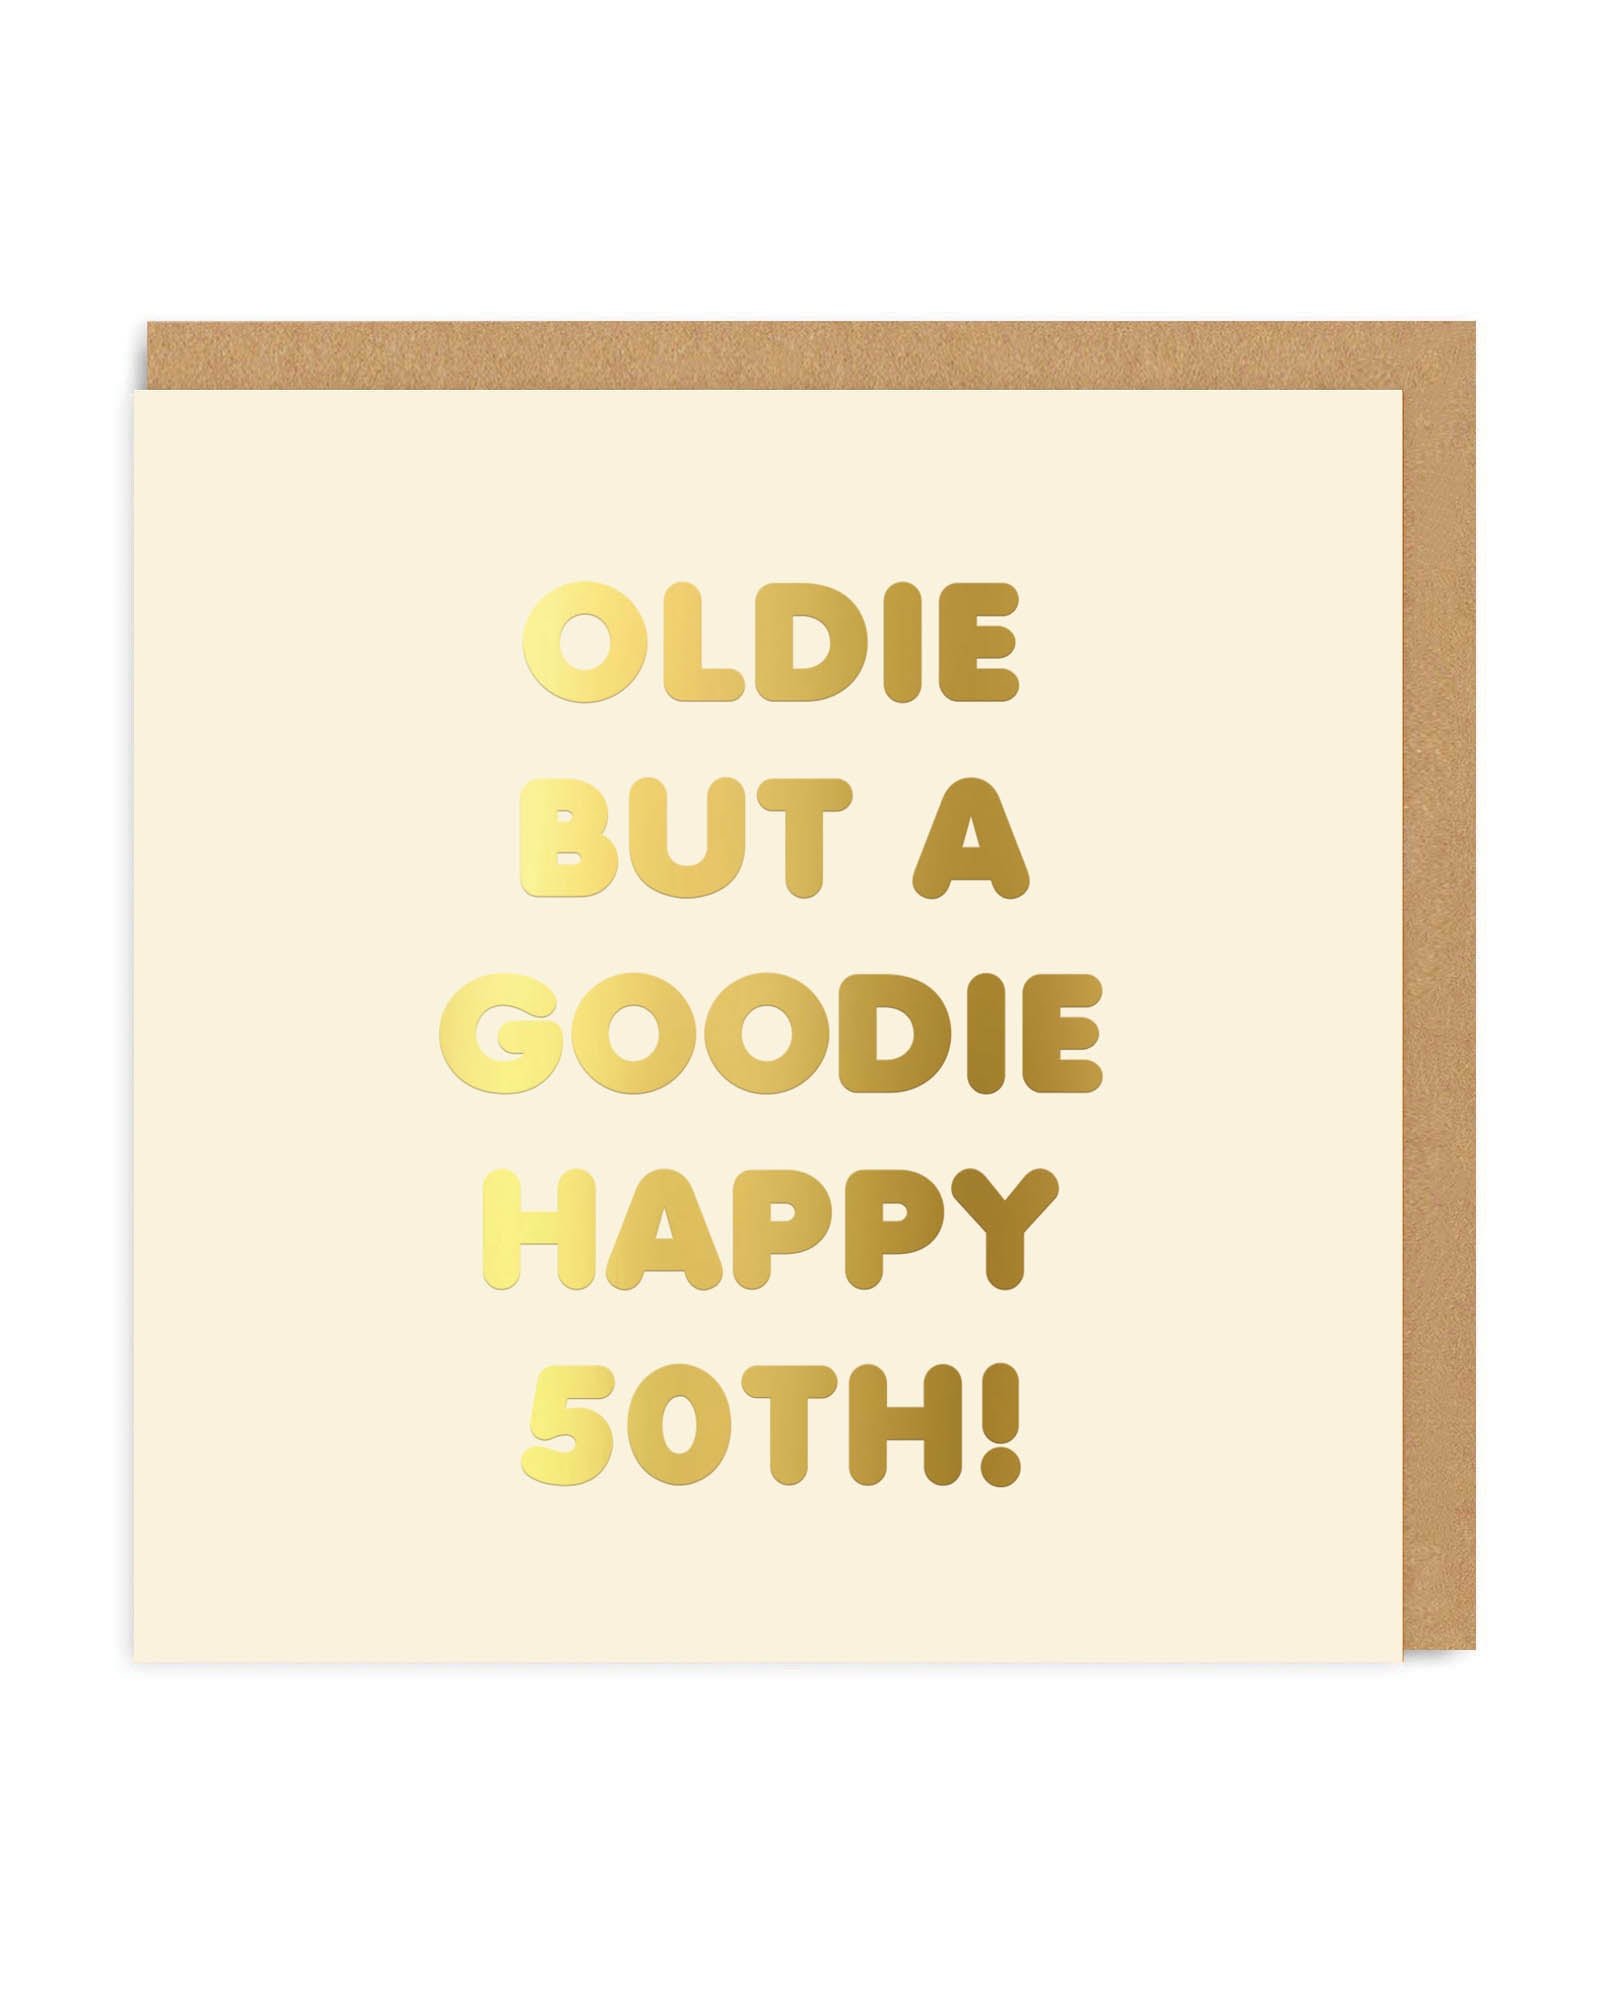 50th Birthday Card 50 Oldie but a Goodie Birthday Card